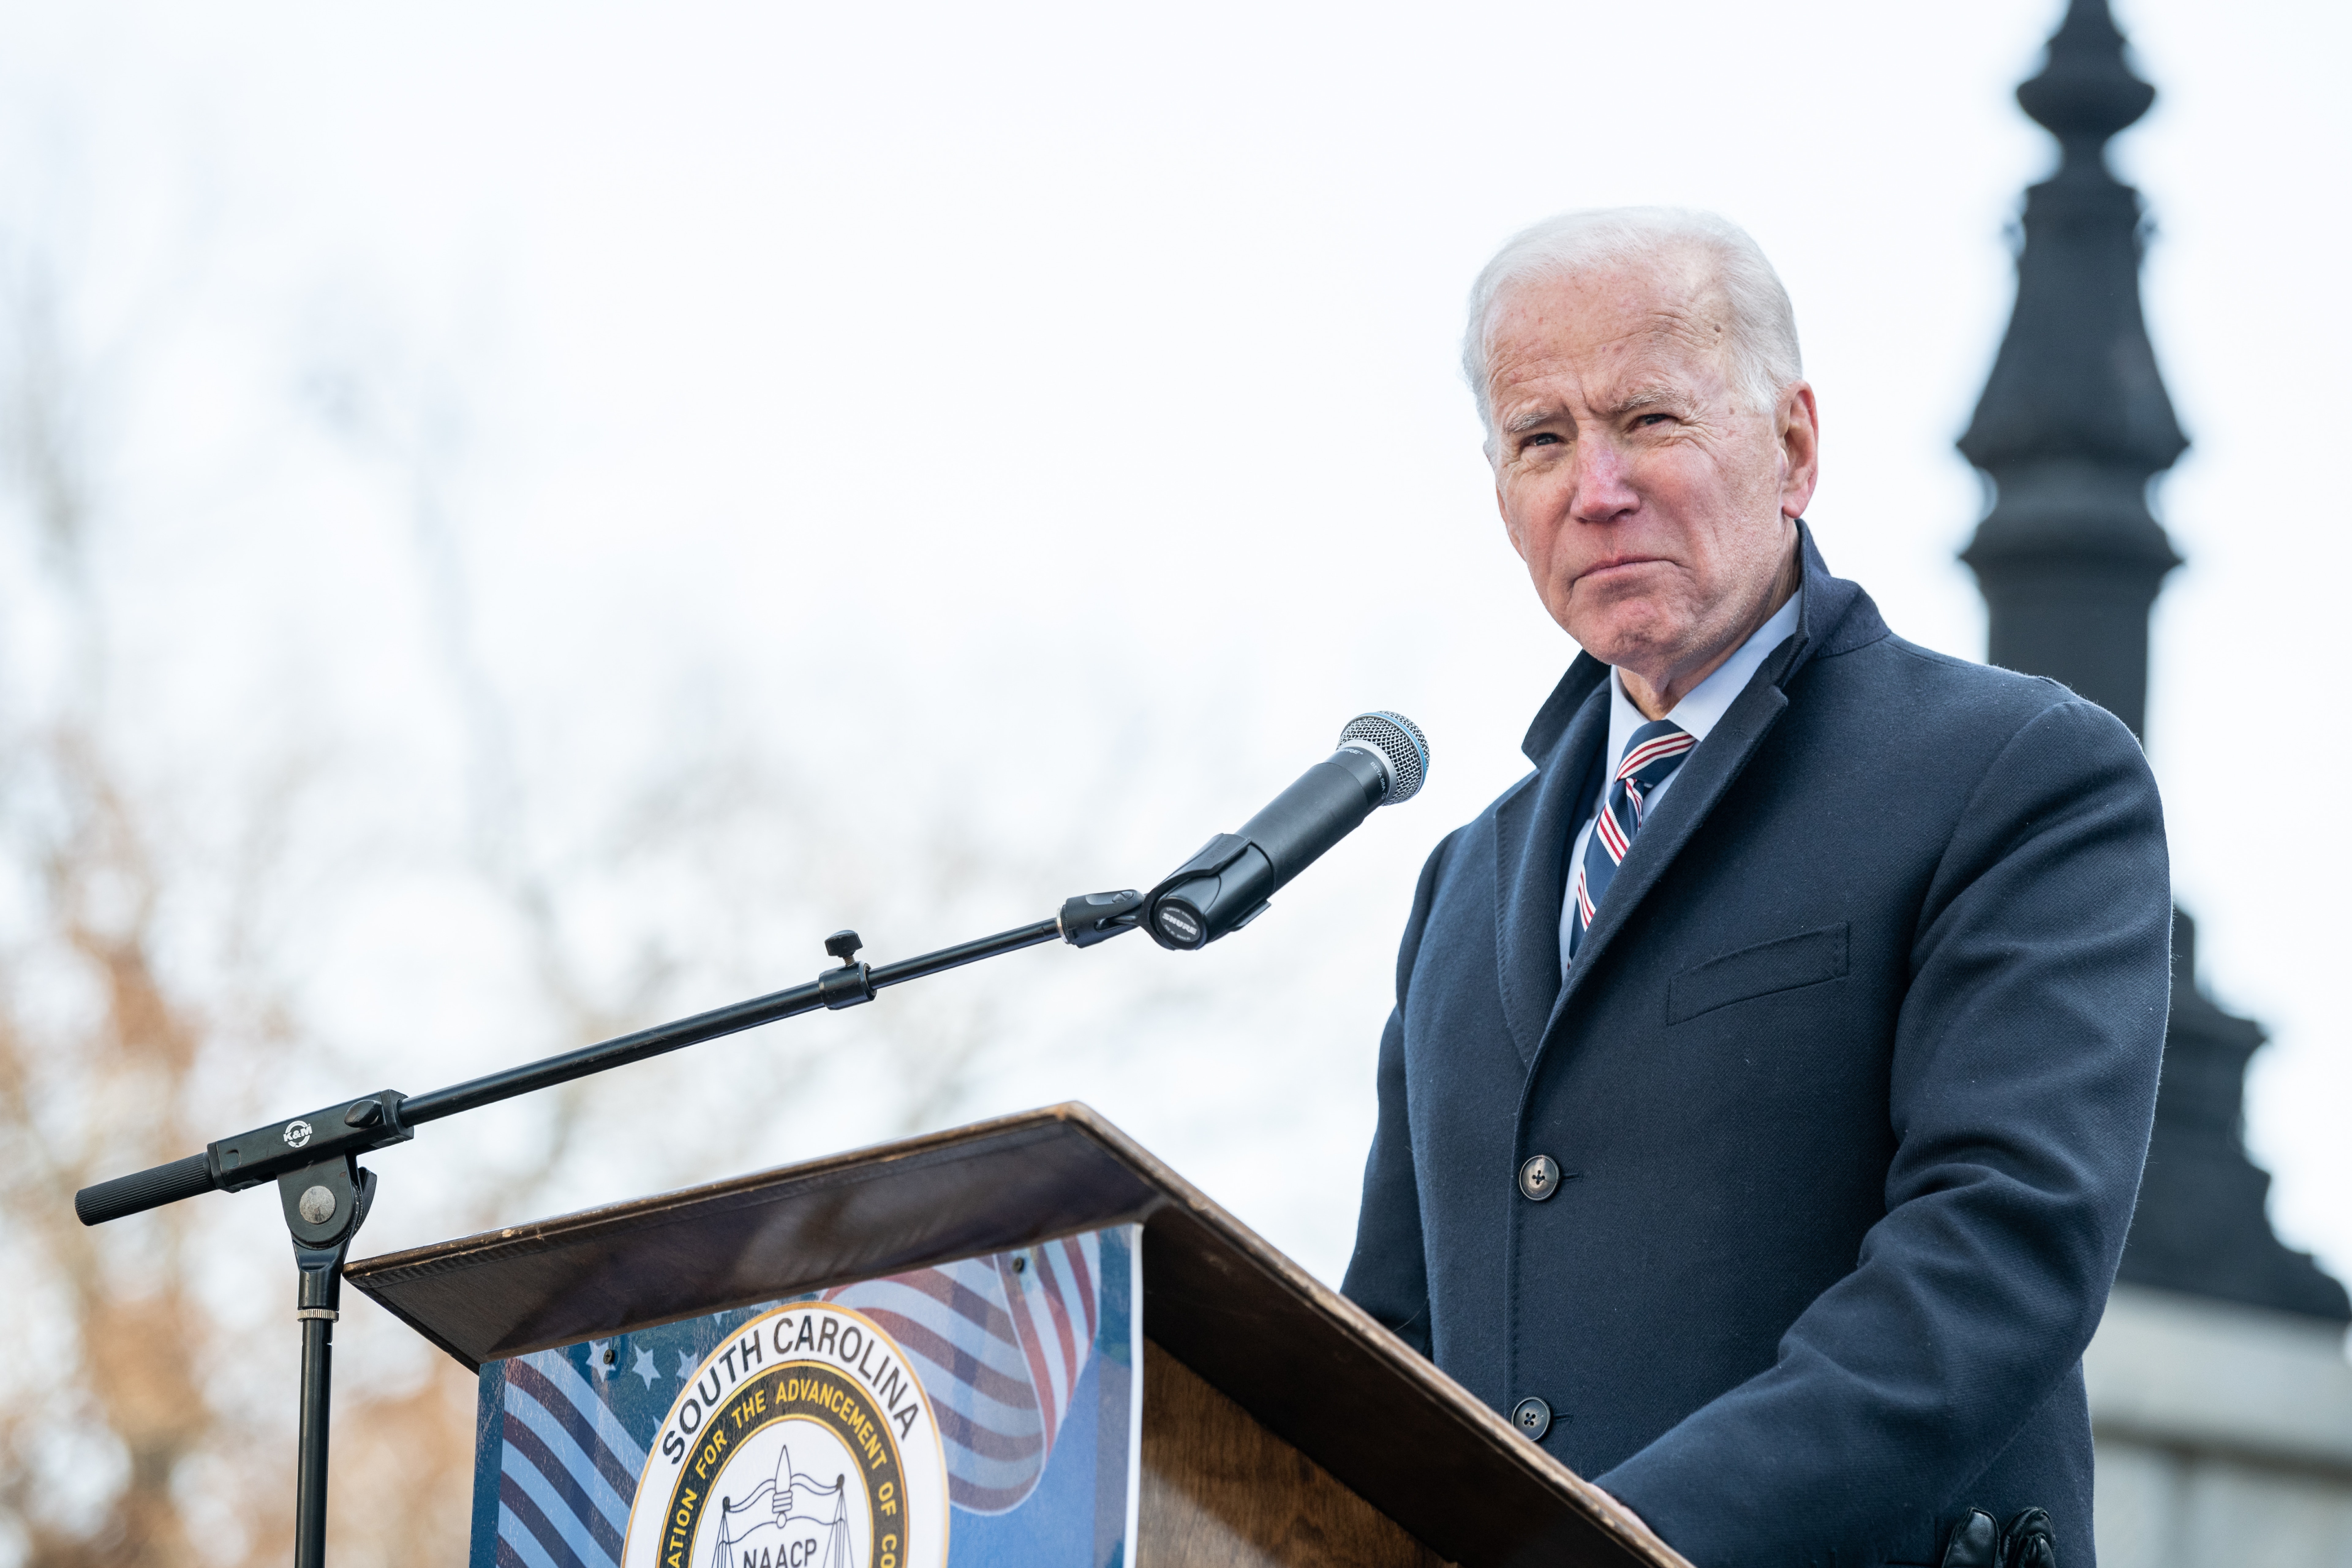 A Look At The SPY Heading Into The Week With Biden&#39;s Tentative Debt Ceiling Deal In Focus